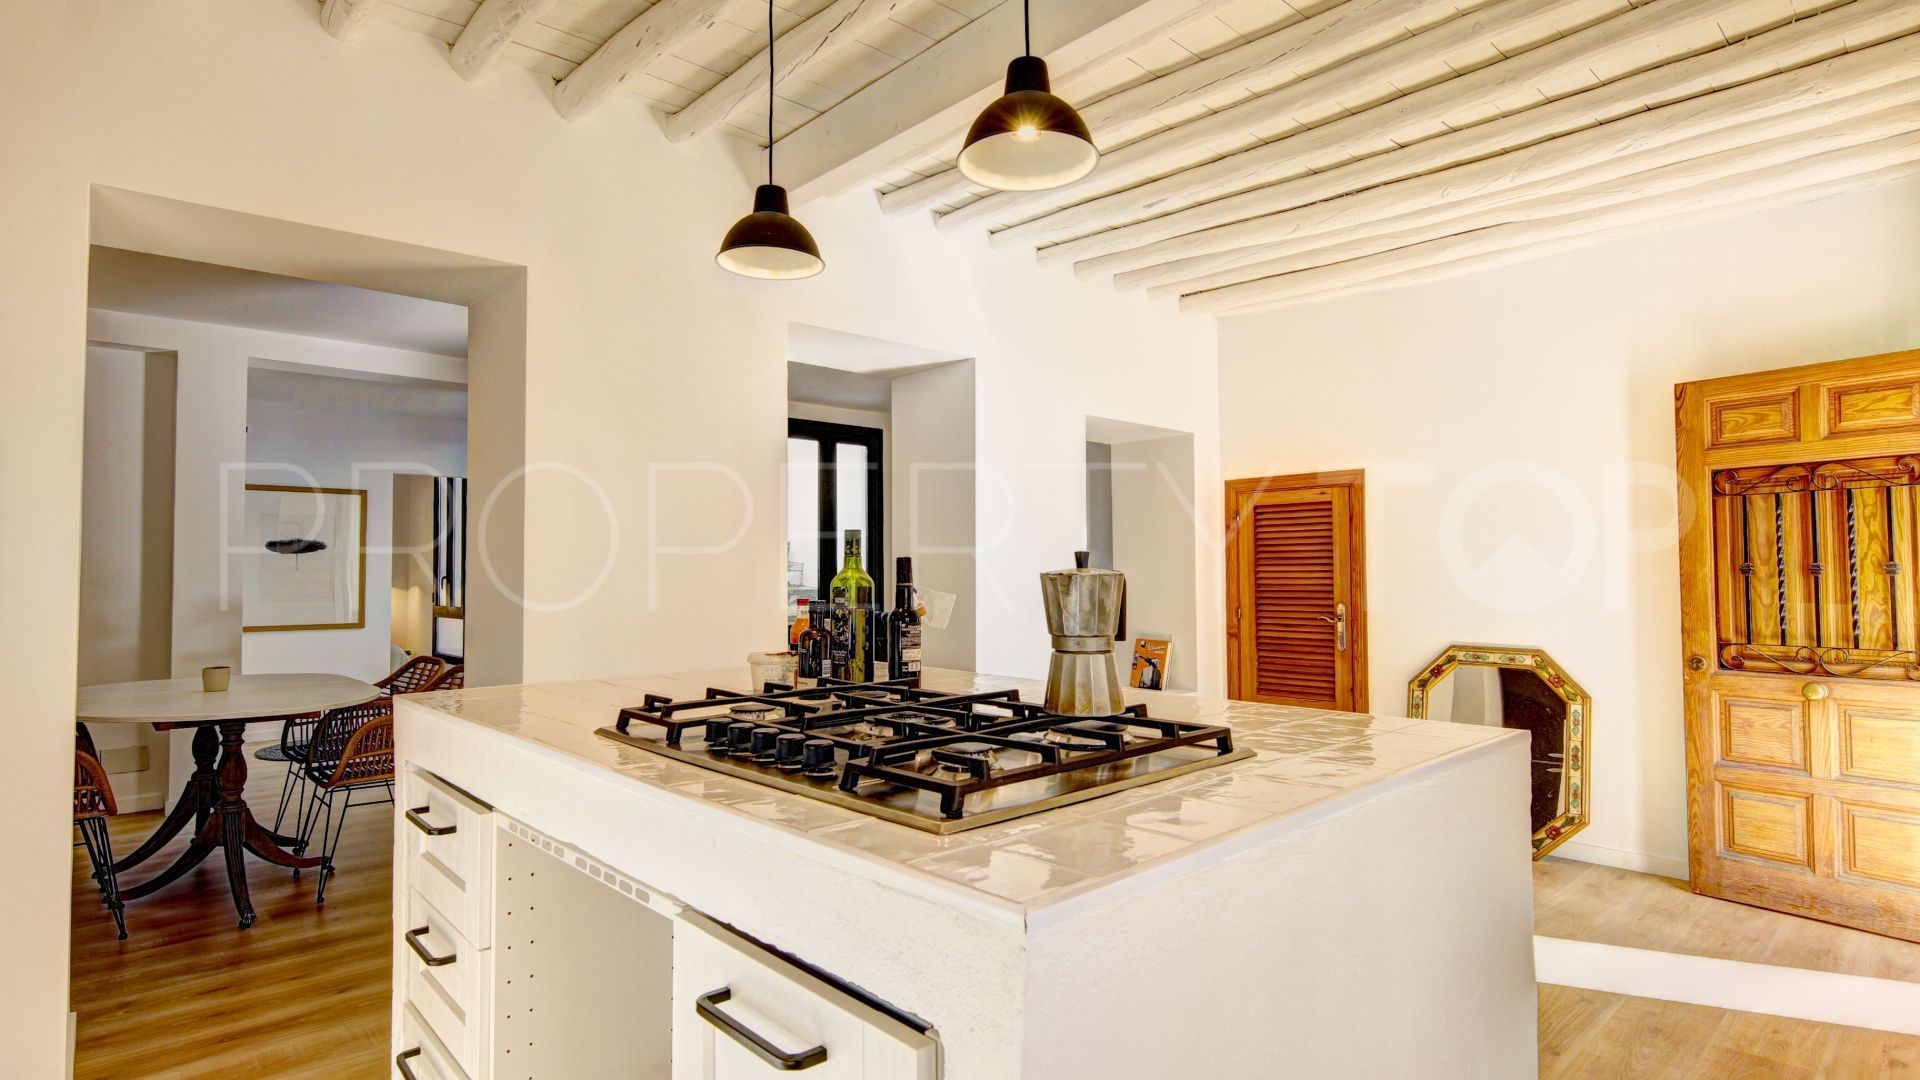 For sale Estepona Old Town ground floor apartment with 1 bedroom